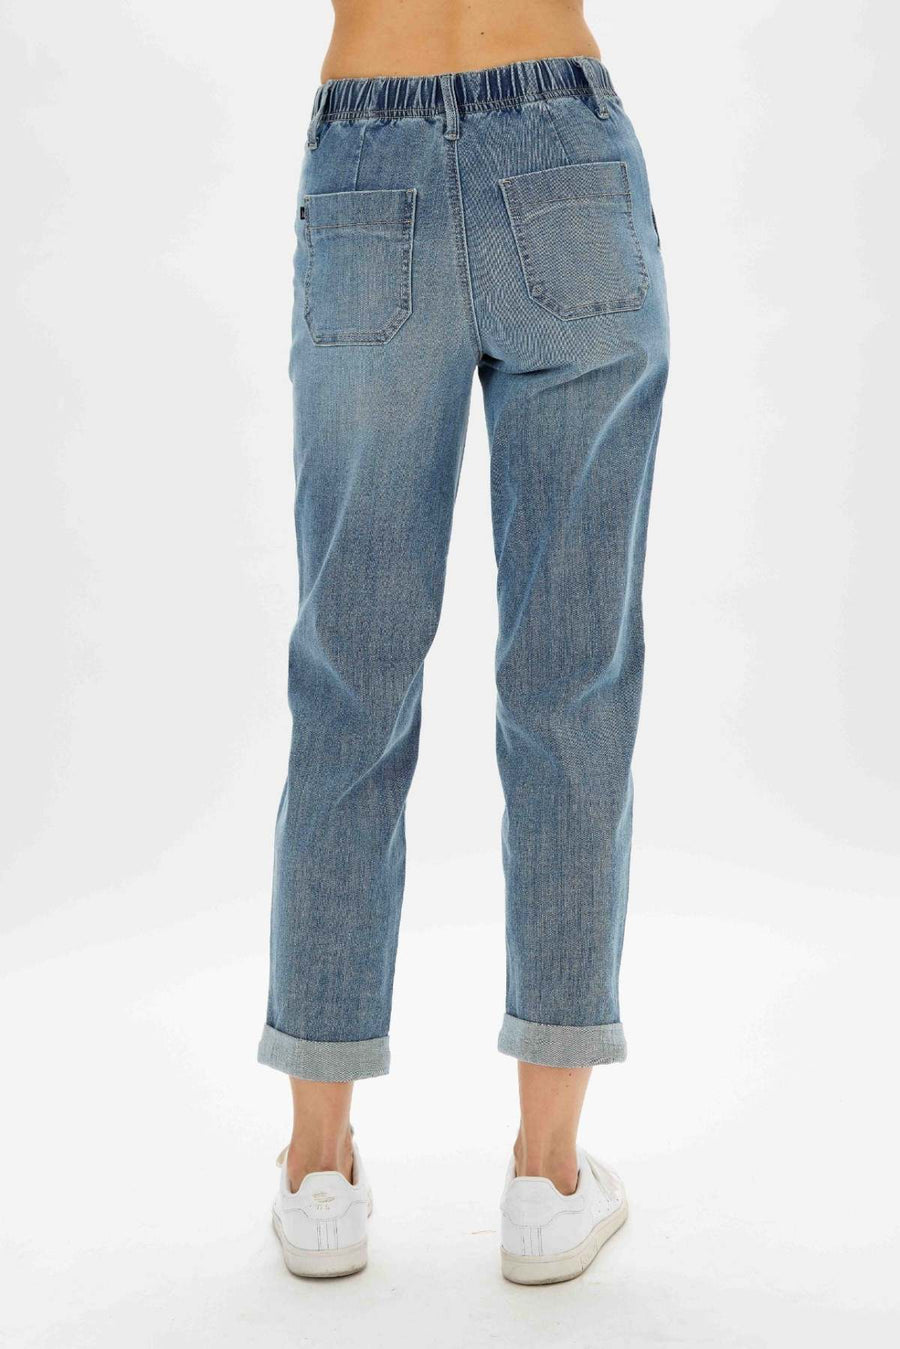 Judy Blue SPRING Hi-Rise Pull-On Denim Joggers with Drawstrings – Emma  Lou's Boutique